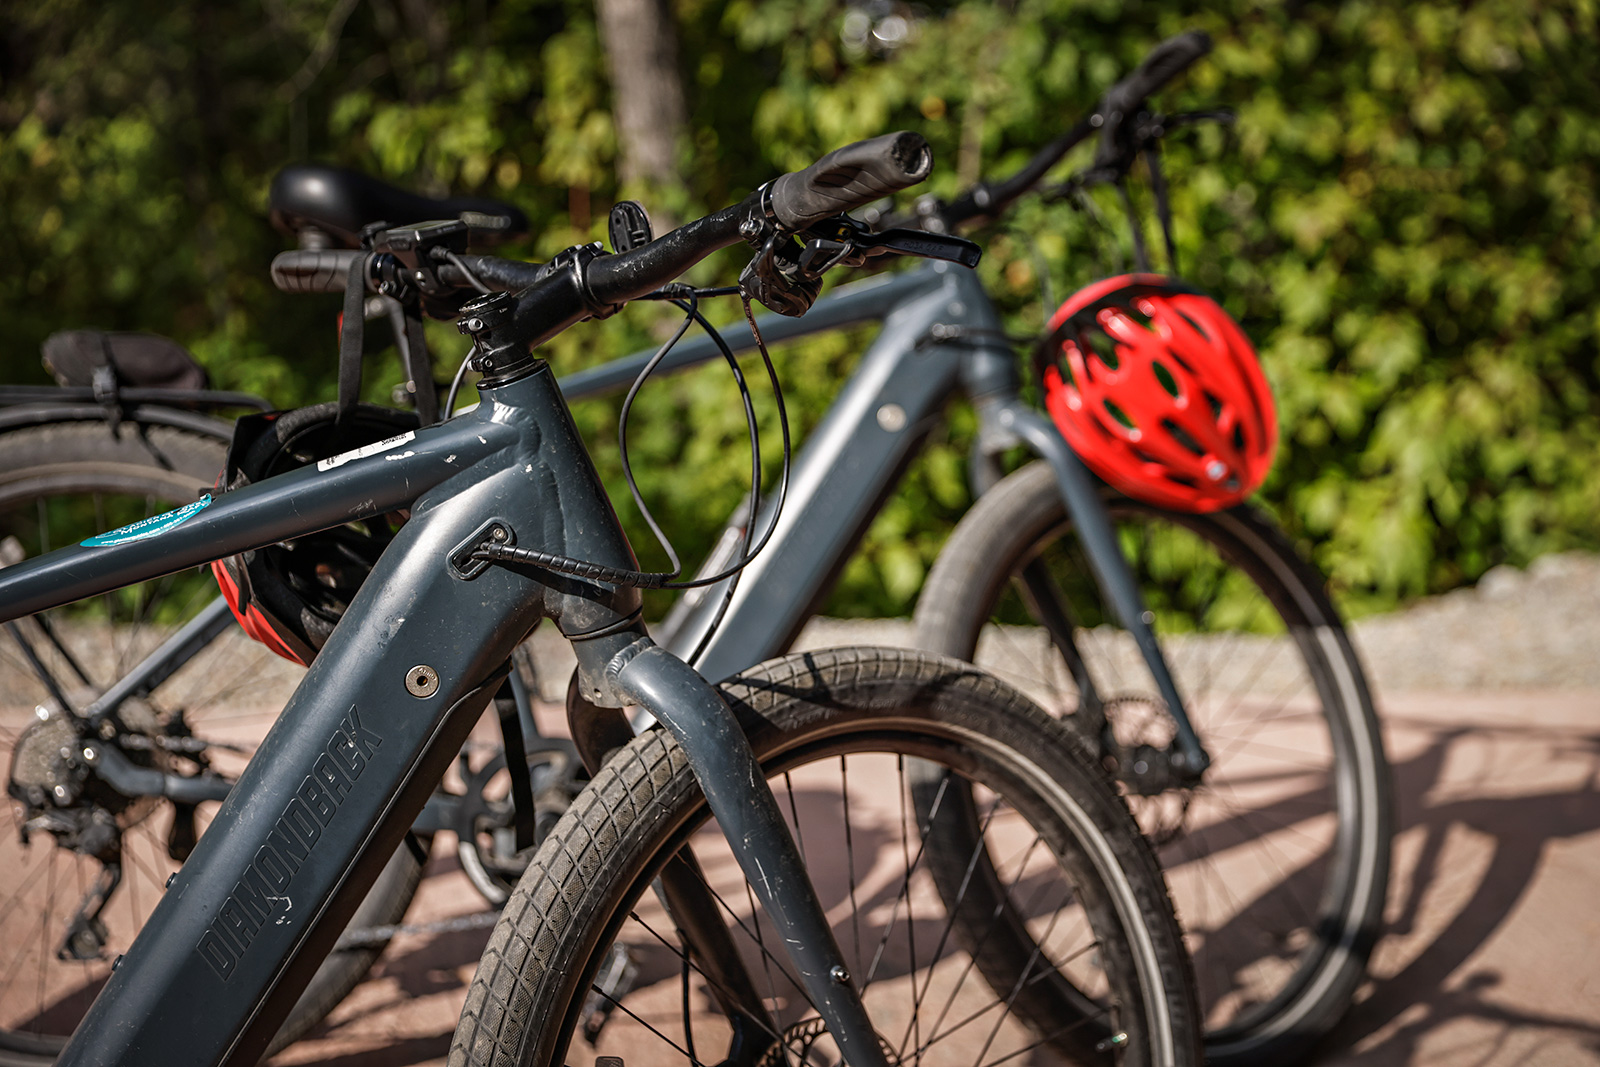 Bills to Expand E-bike Use on Trails Elicit Concerns - Flathead Beacon